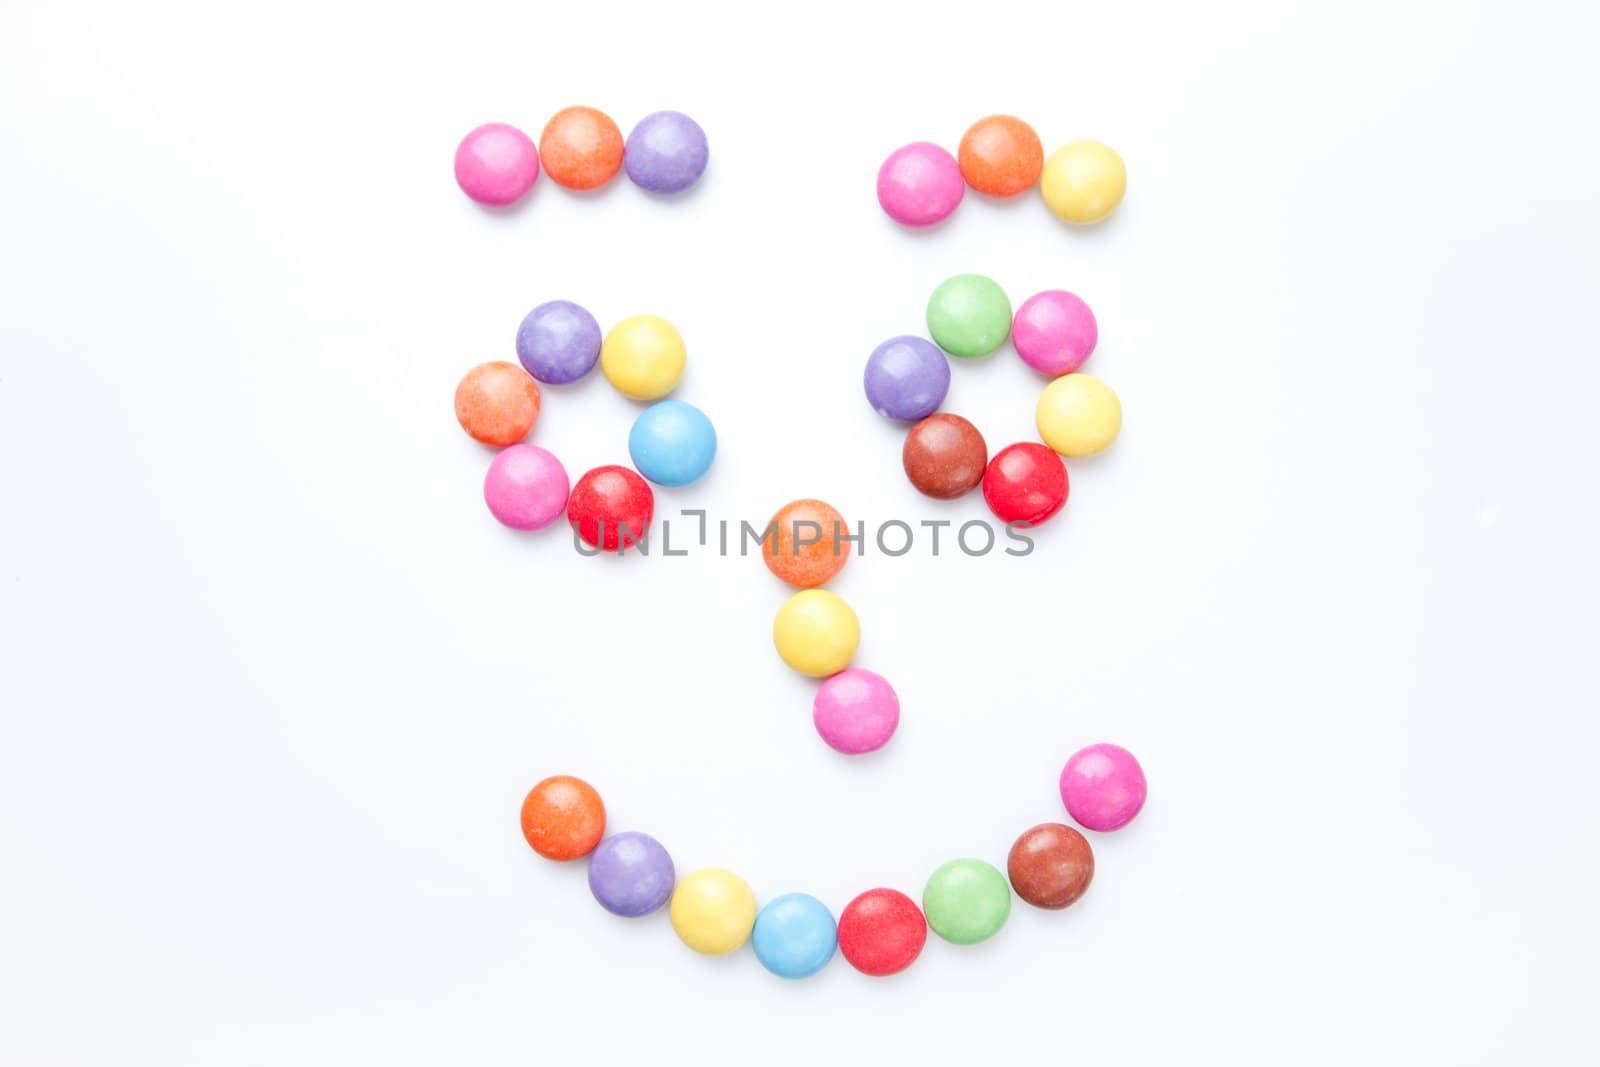 Face of candies by Wavebreakmedia